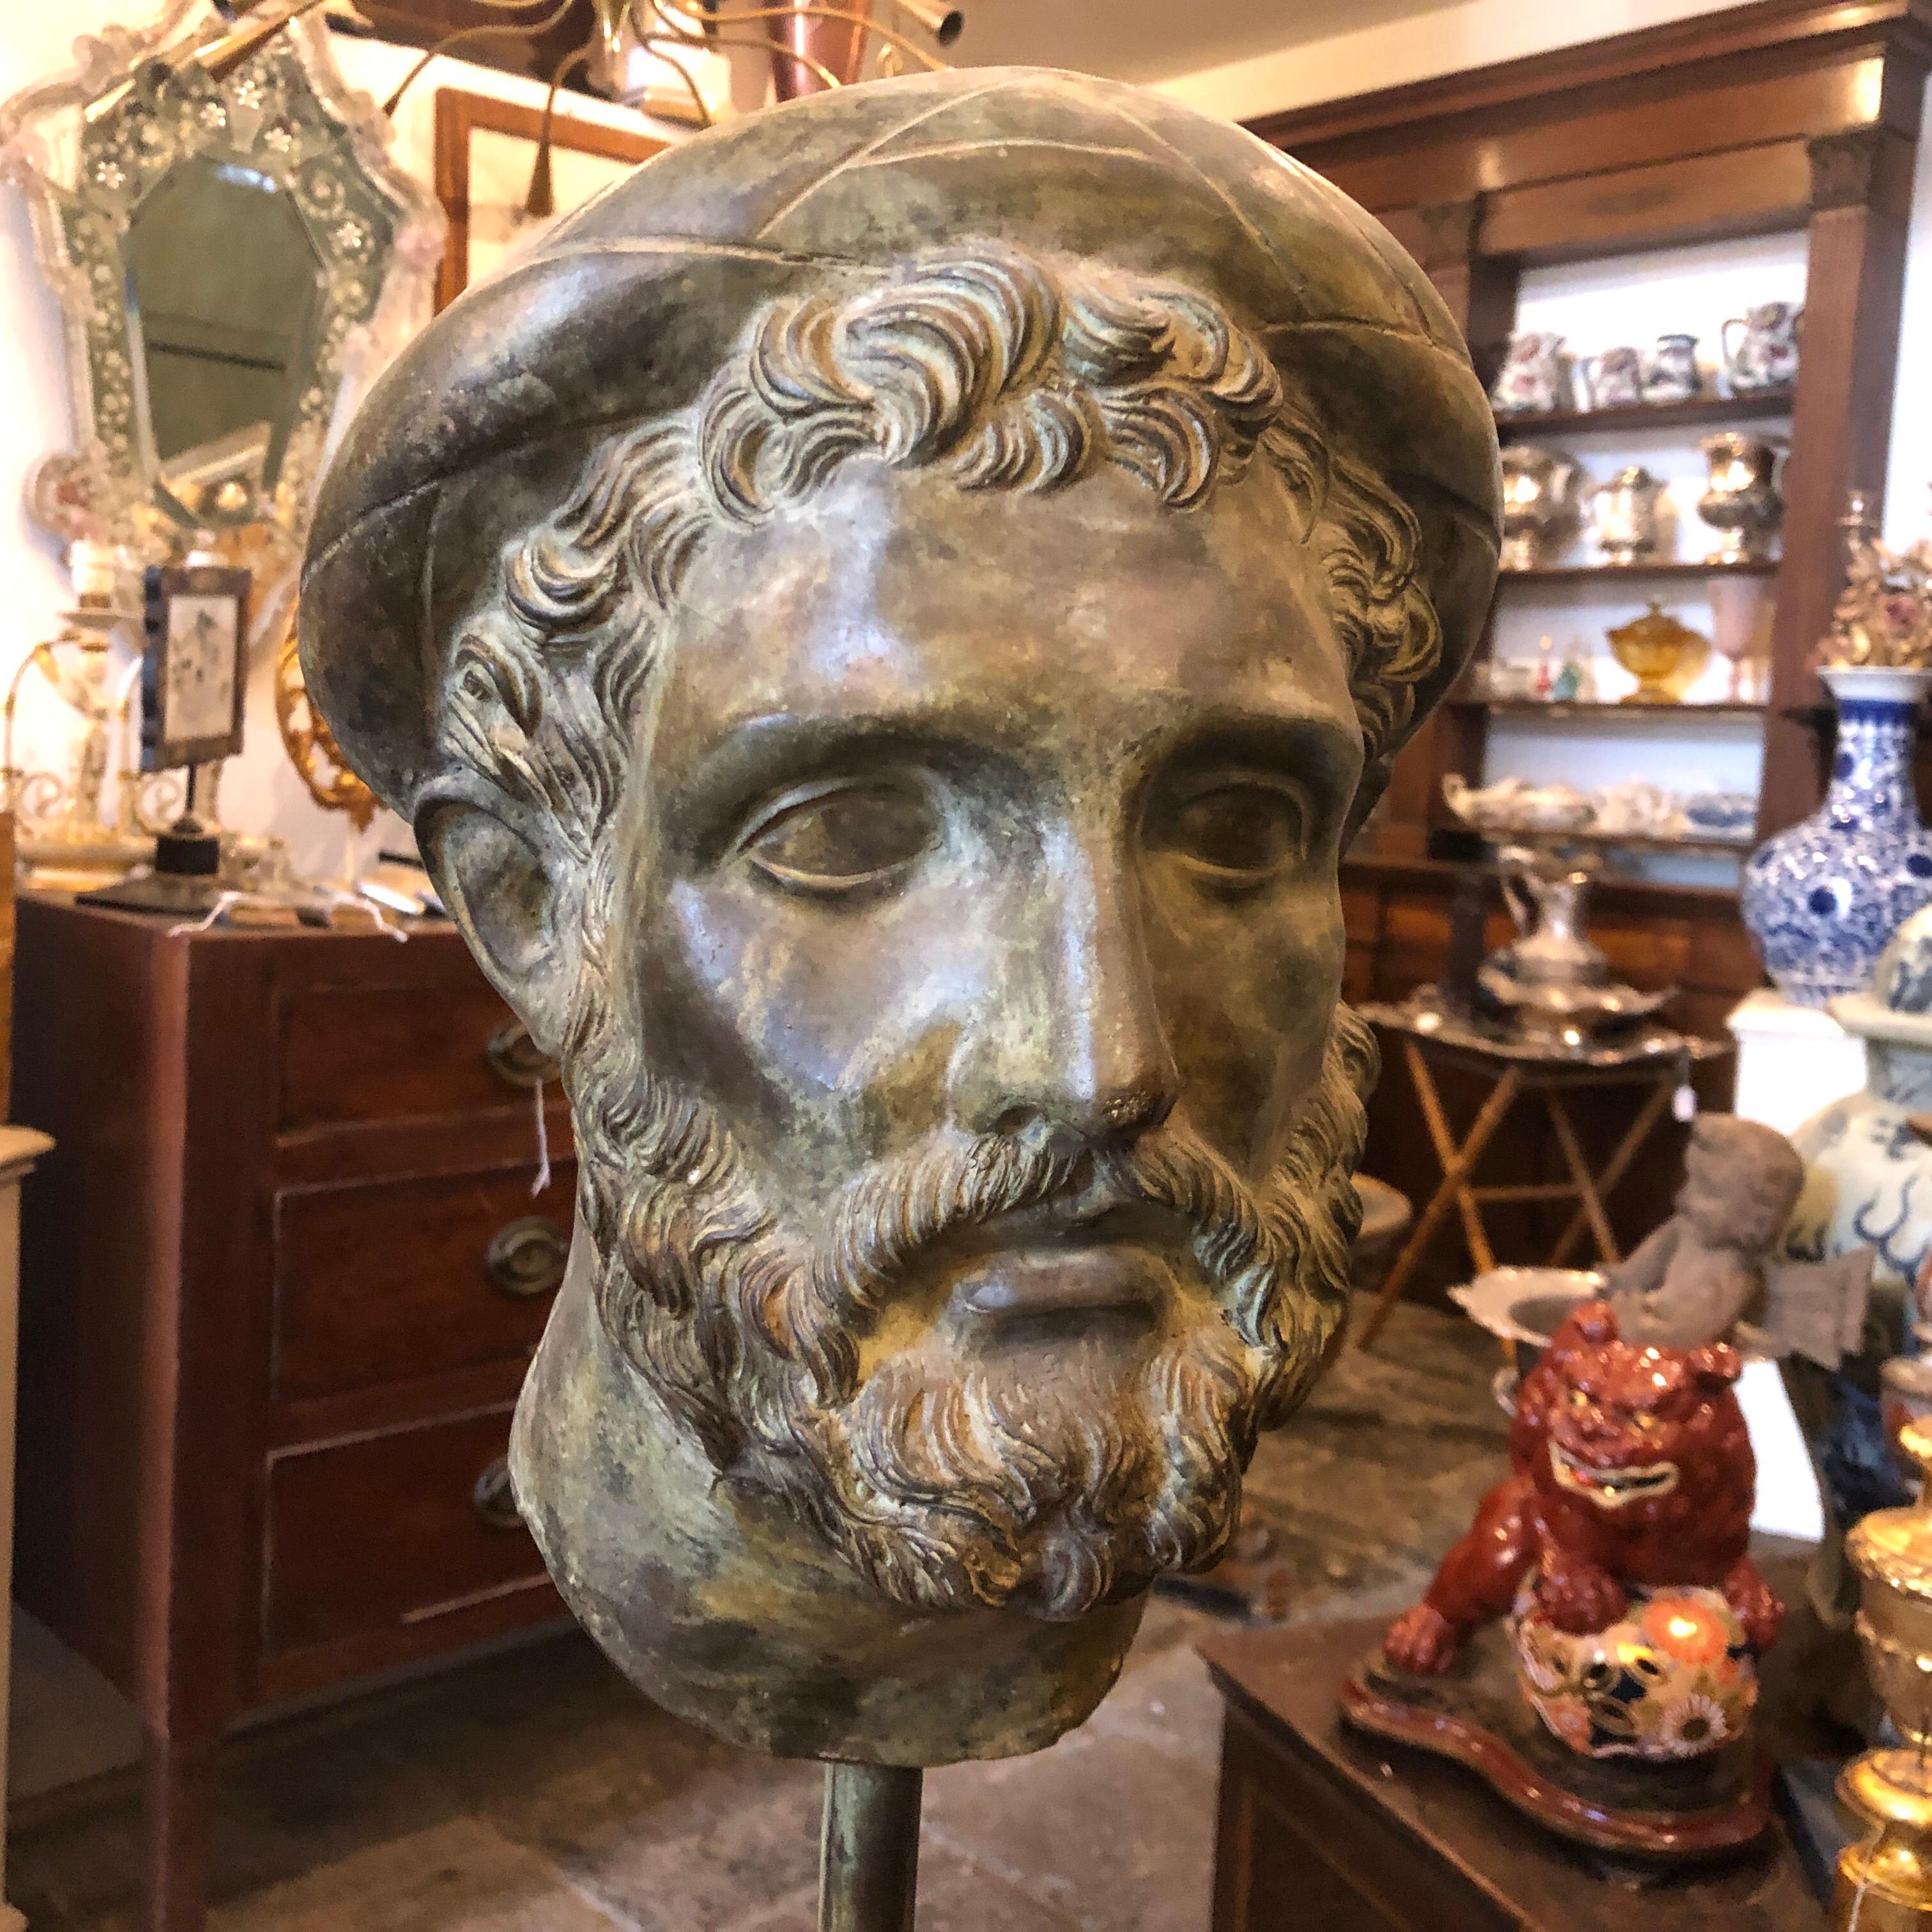 A men's head bronze made in Naples in the 1950s, good conditions overall. The figure is mounted on a marble base.